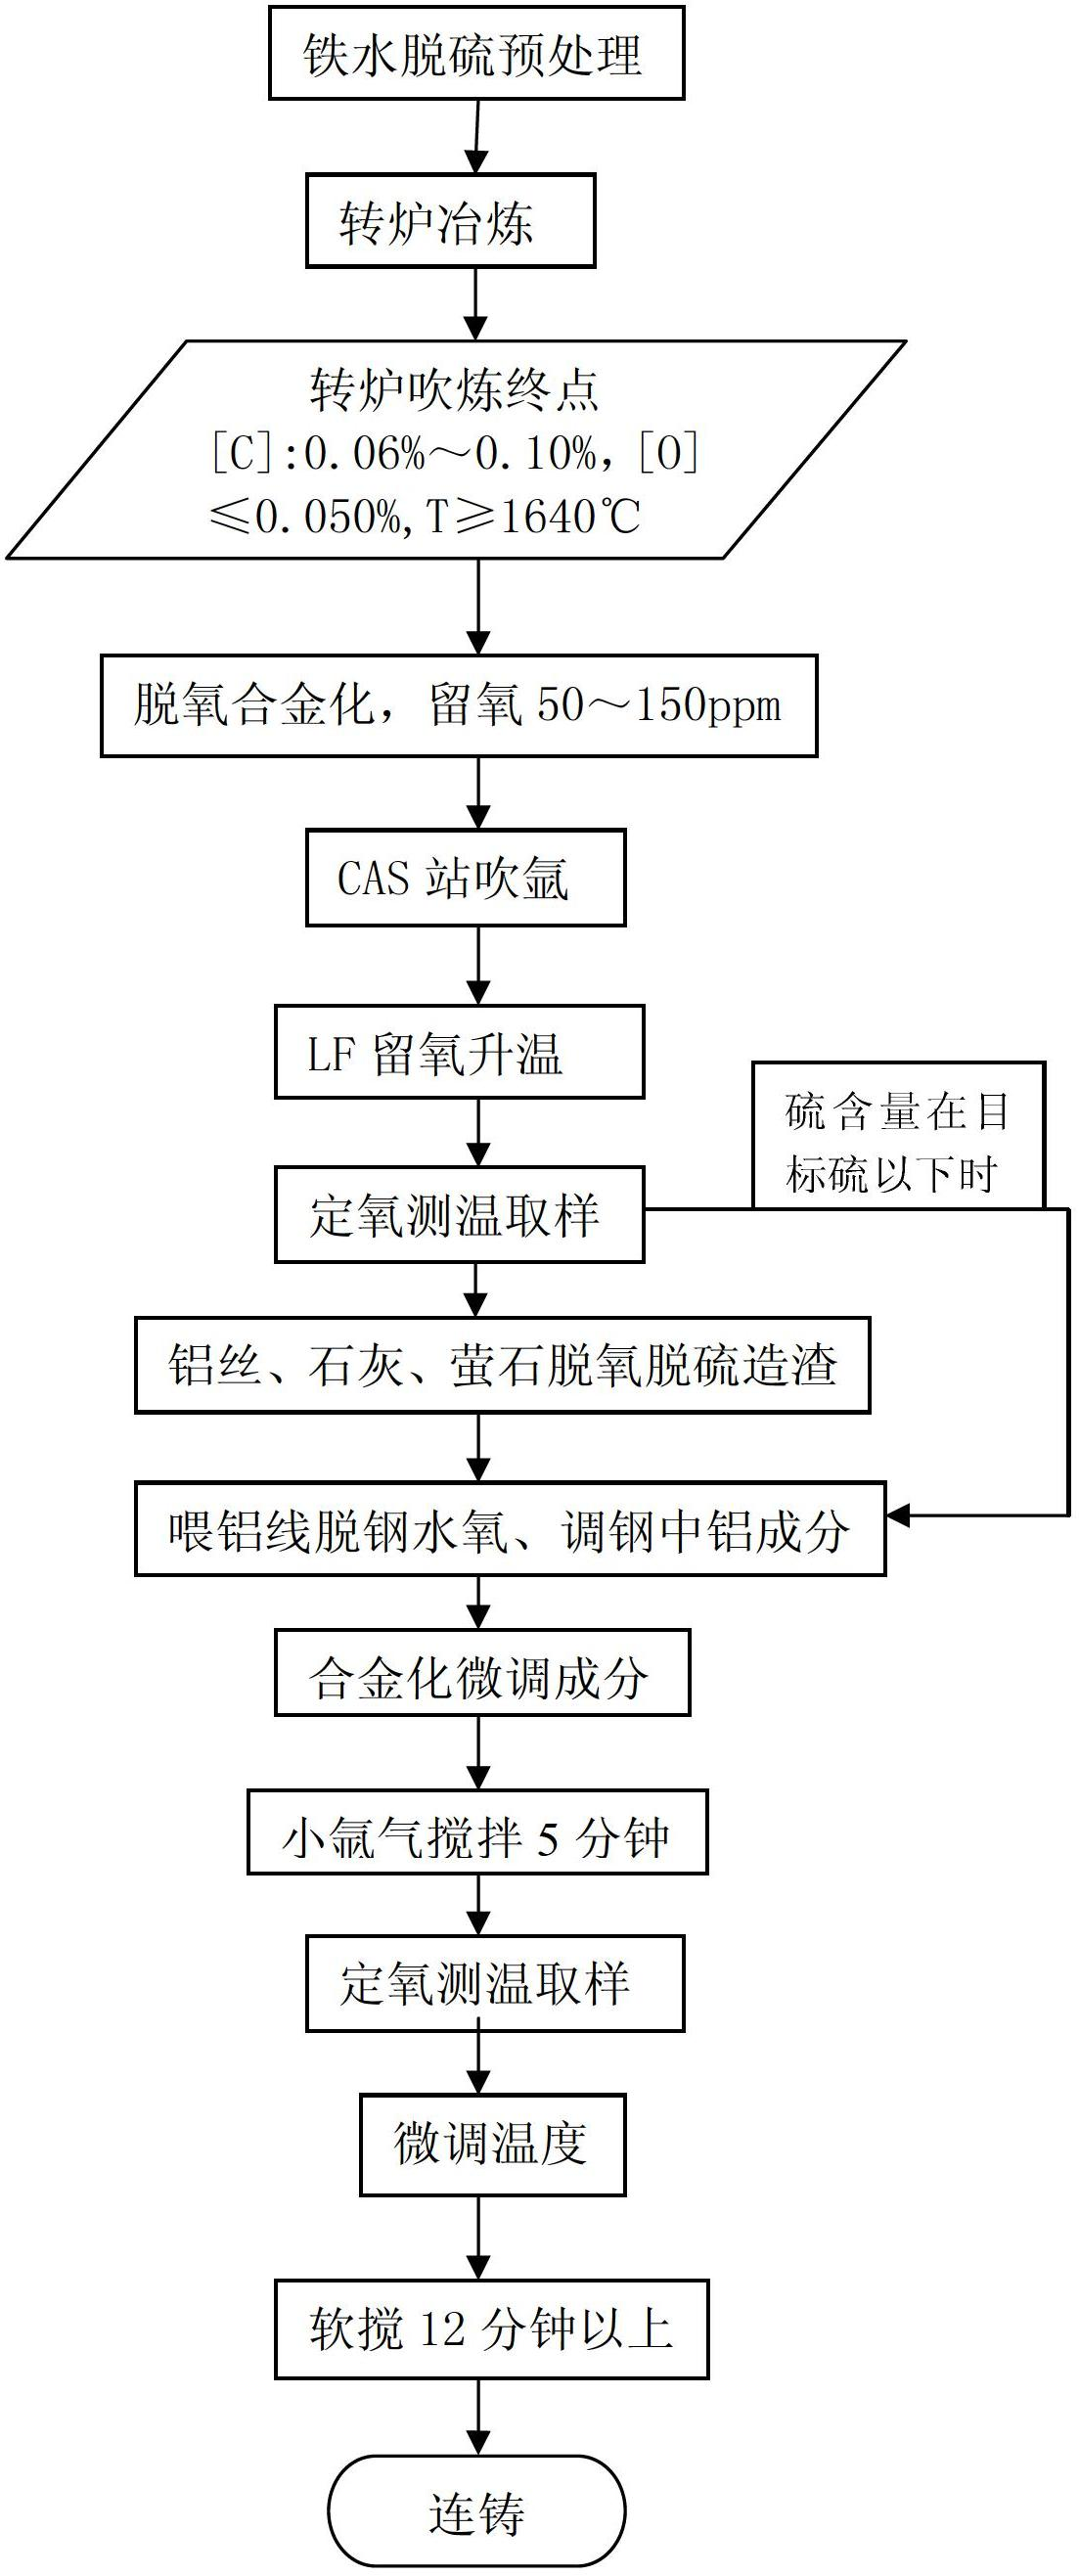 Process for controlling smelting silicon content of low-silicon steel